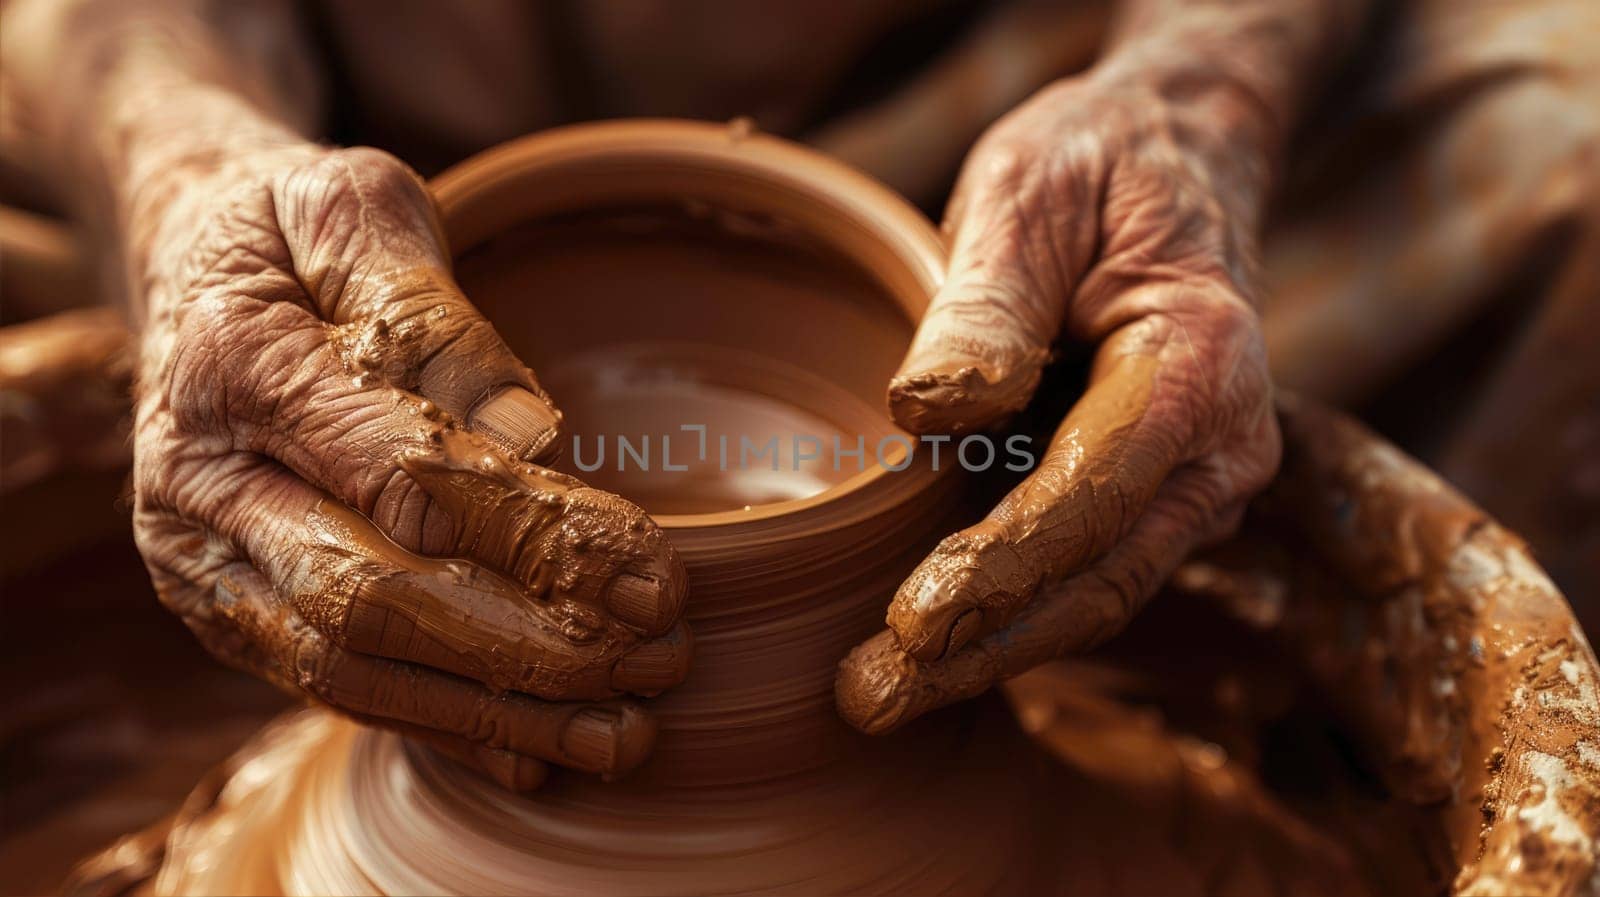 The potter's hands make a clay pot by natali_brill